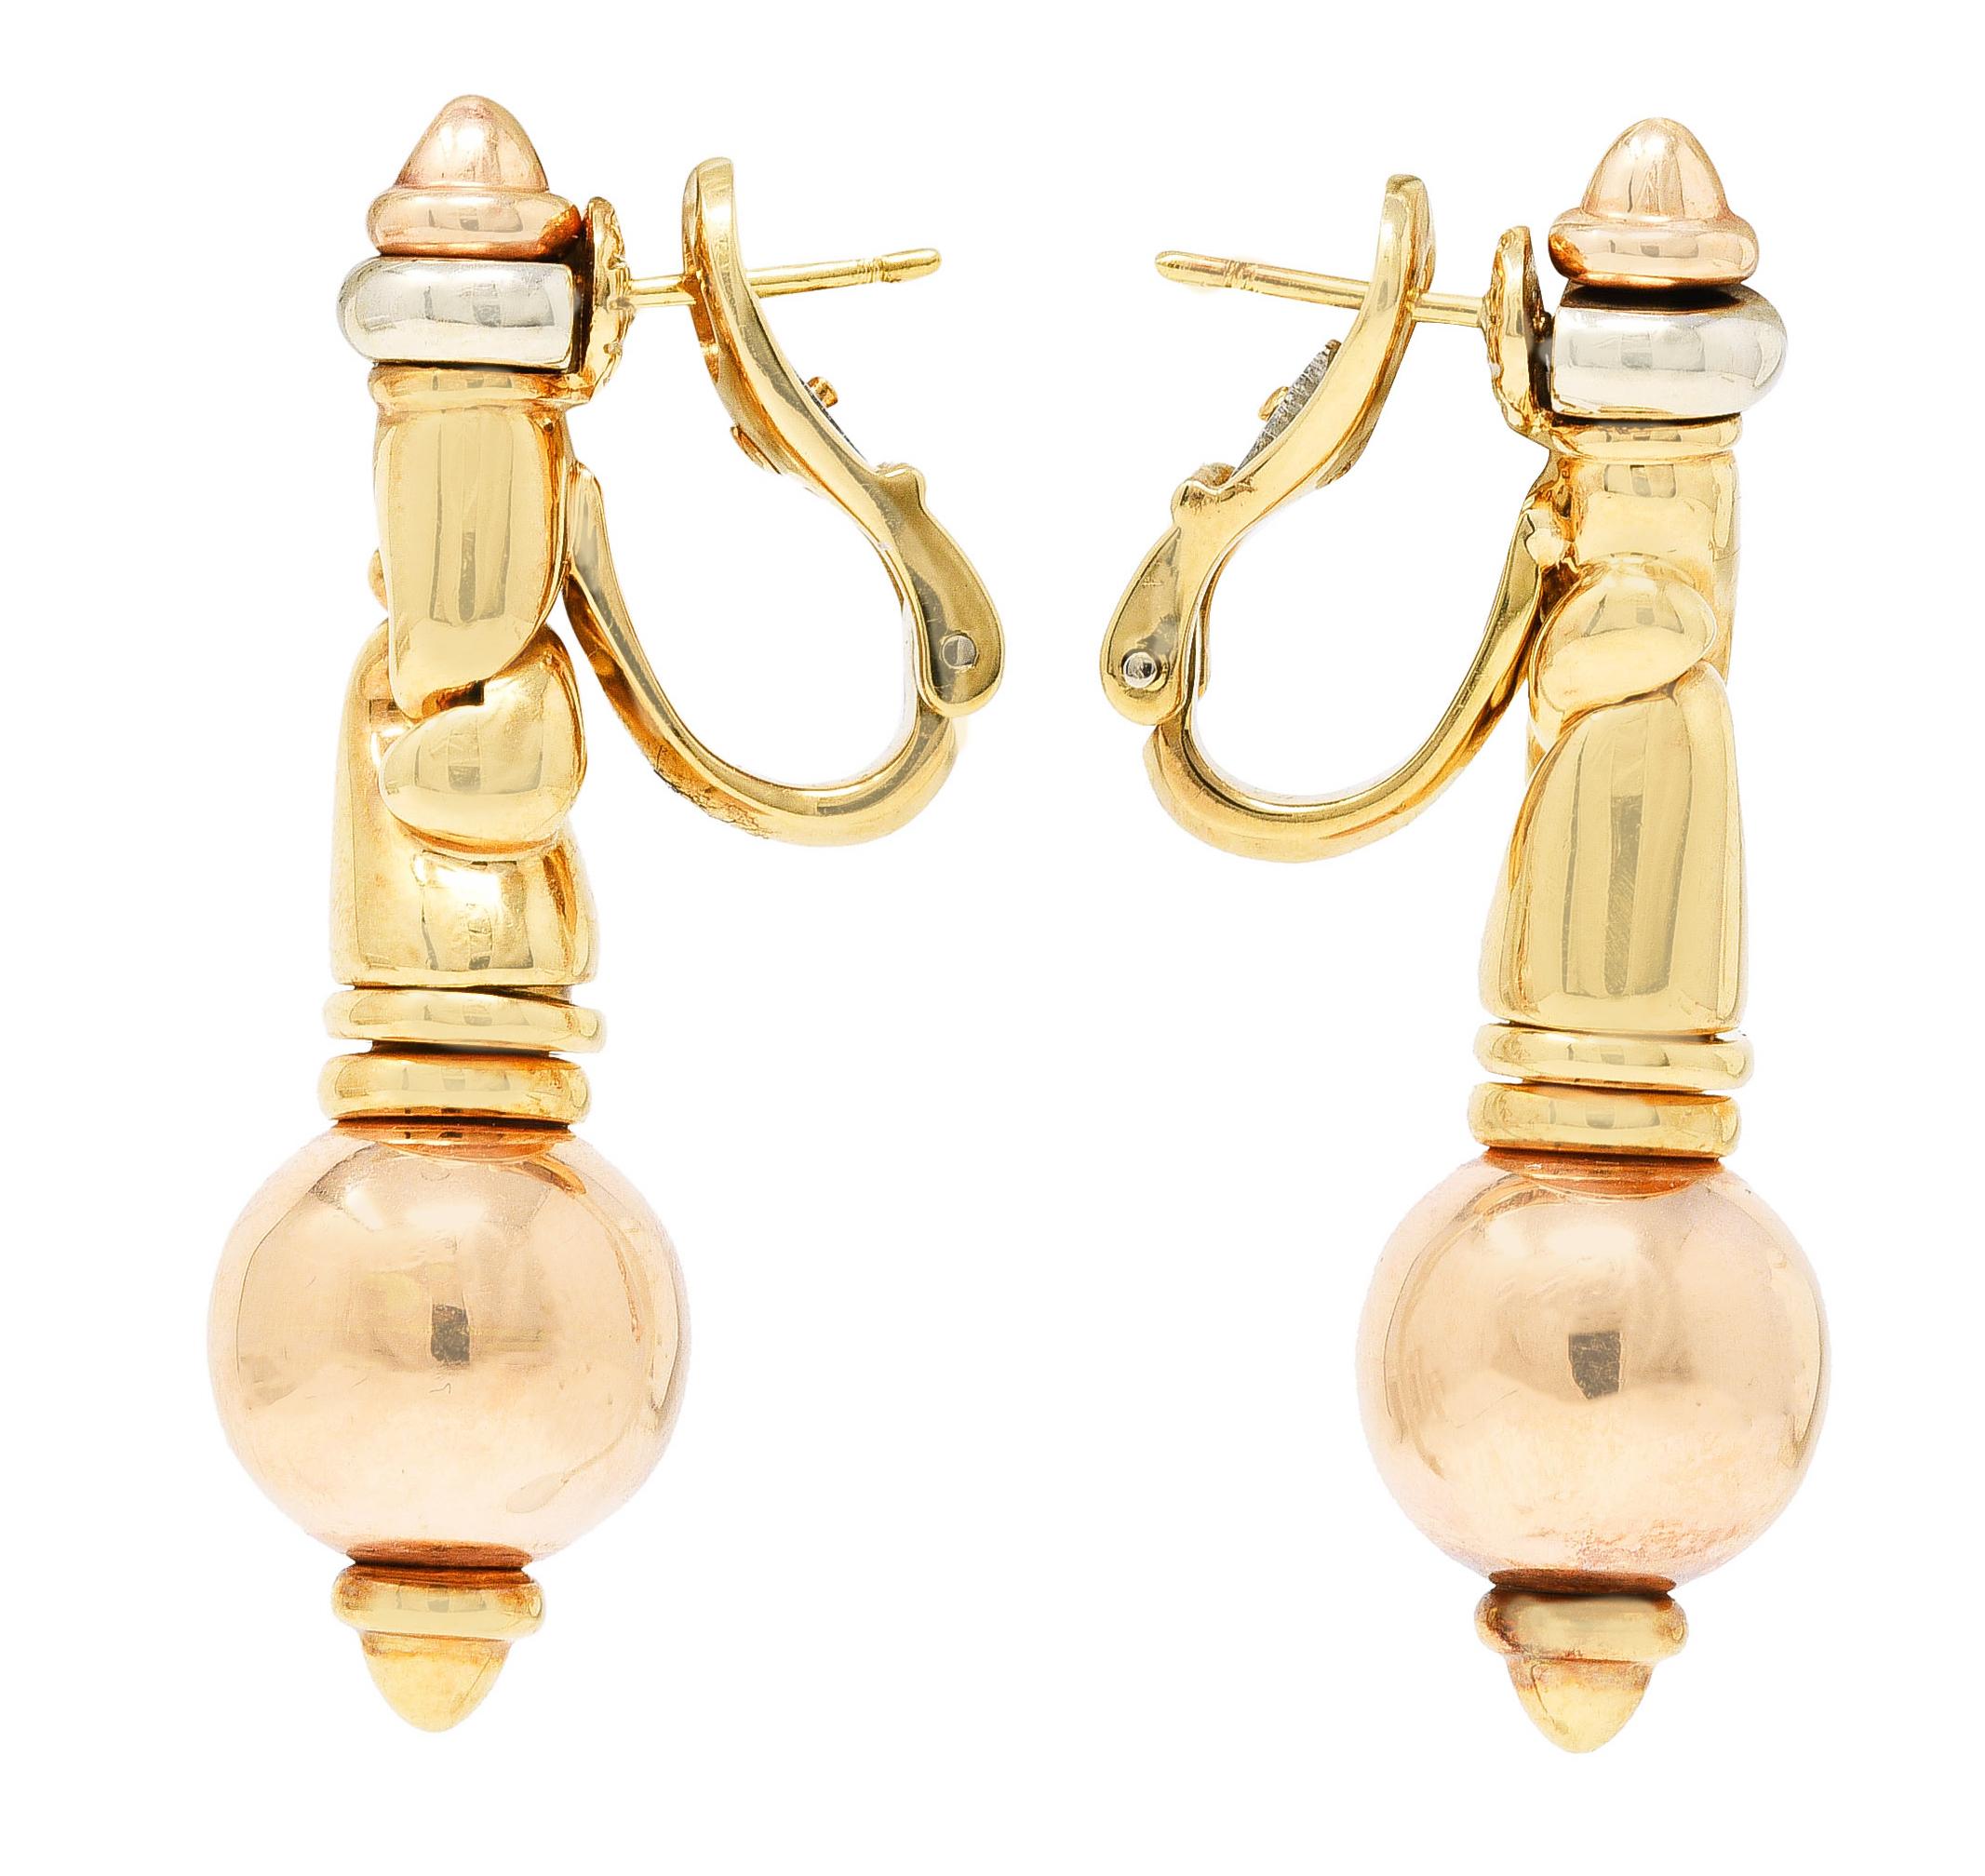 Earrings are comprised of yellow gold signature doppio cuore links. Suspending an 11.5 mm round rose gold bead. With rose and white gold segmented terminals. Completed by posts with hinged omega backs. Stamped 750 for 18 karat gold. Fully signed